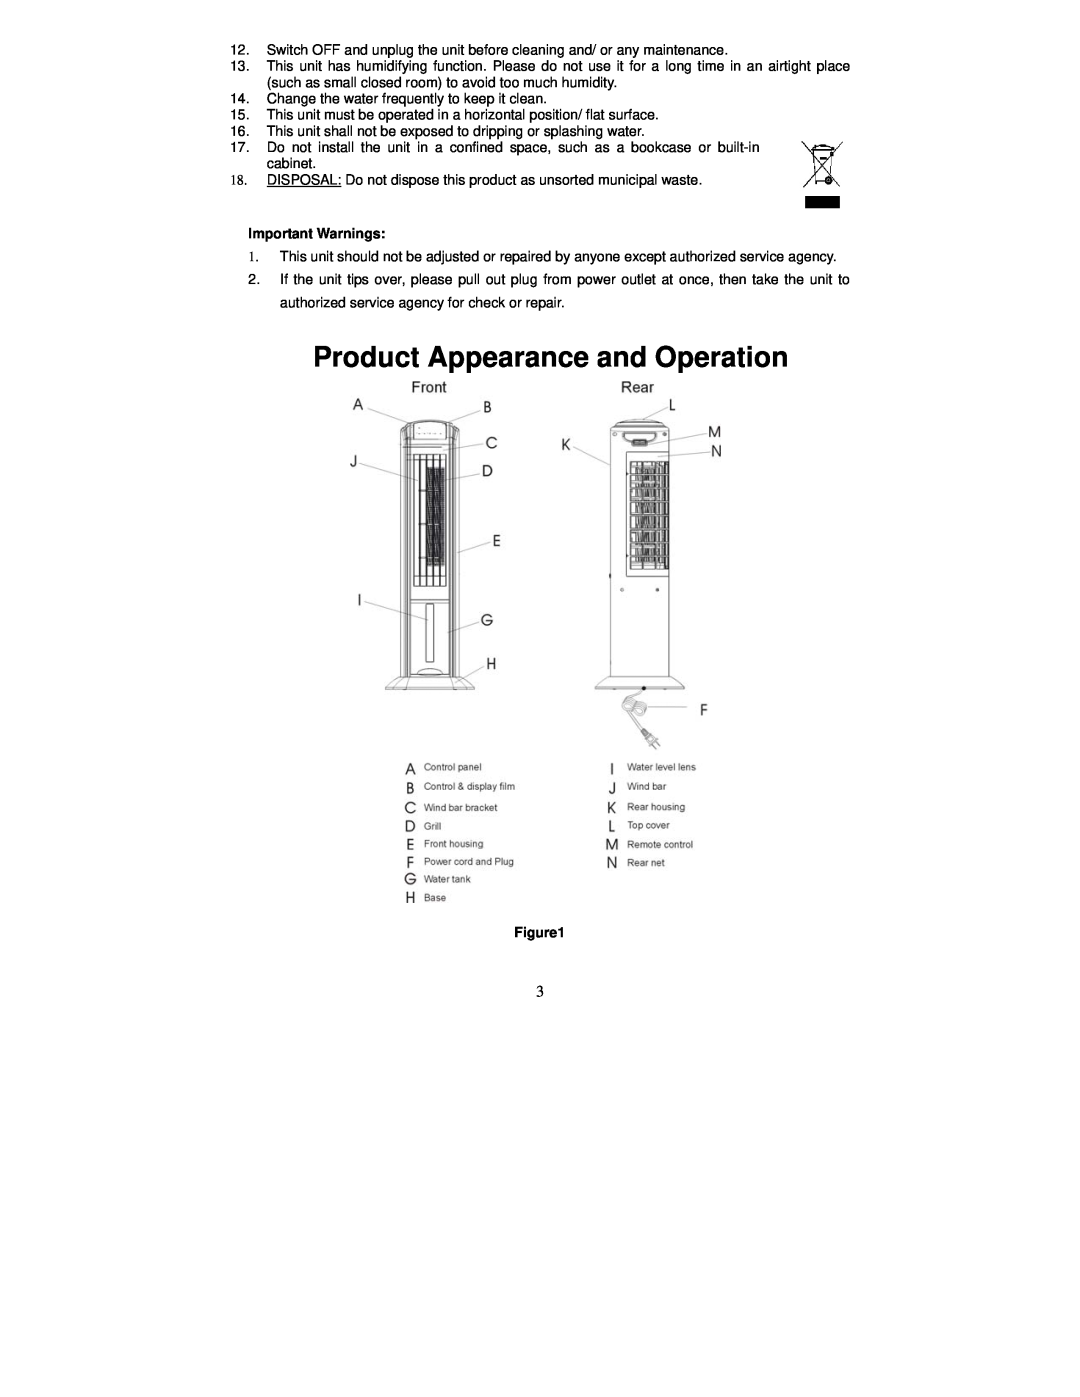 Fujitronic FH-777 instruction manual Product Appearance and Operation, Important Warnings 